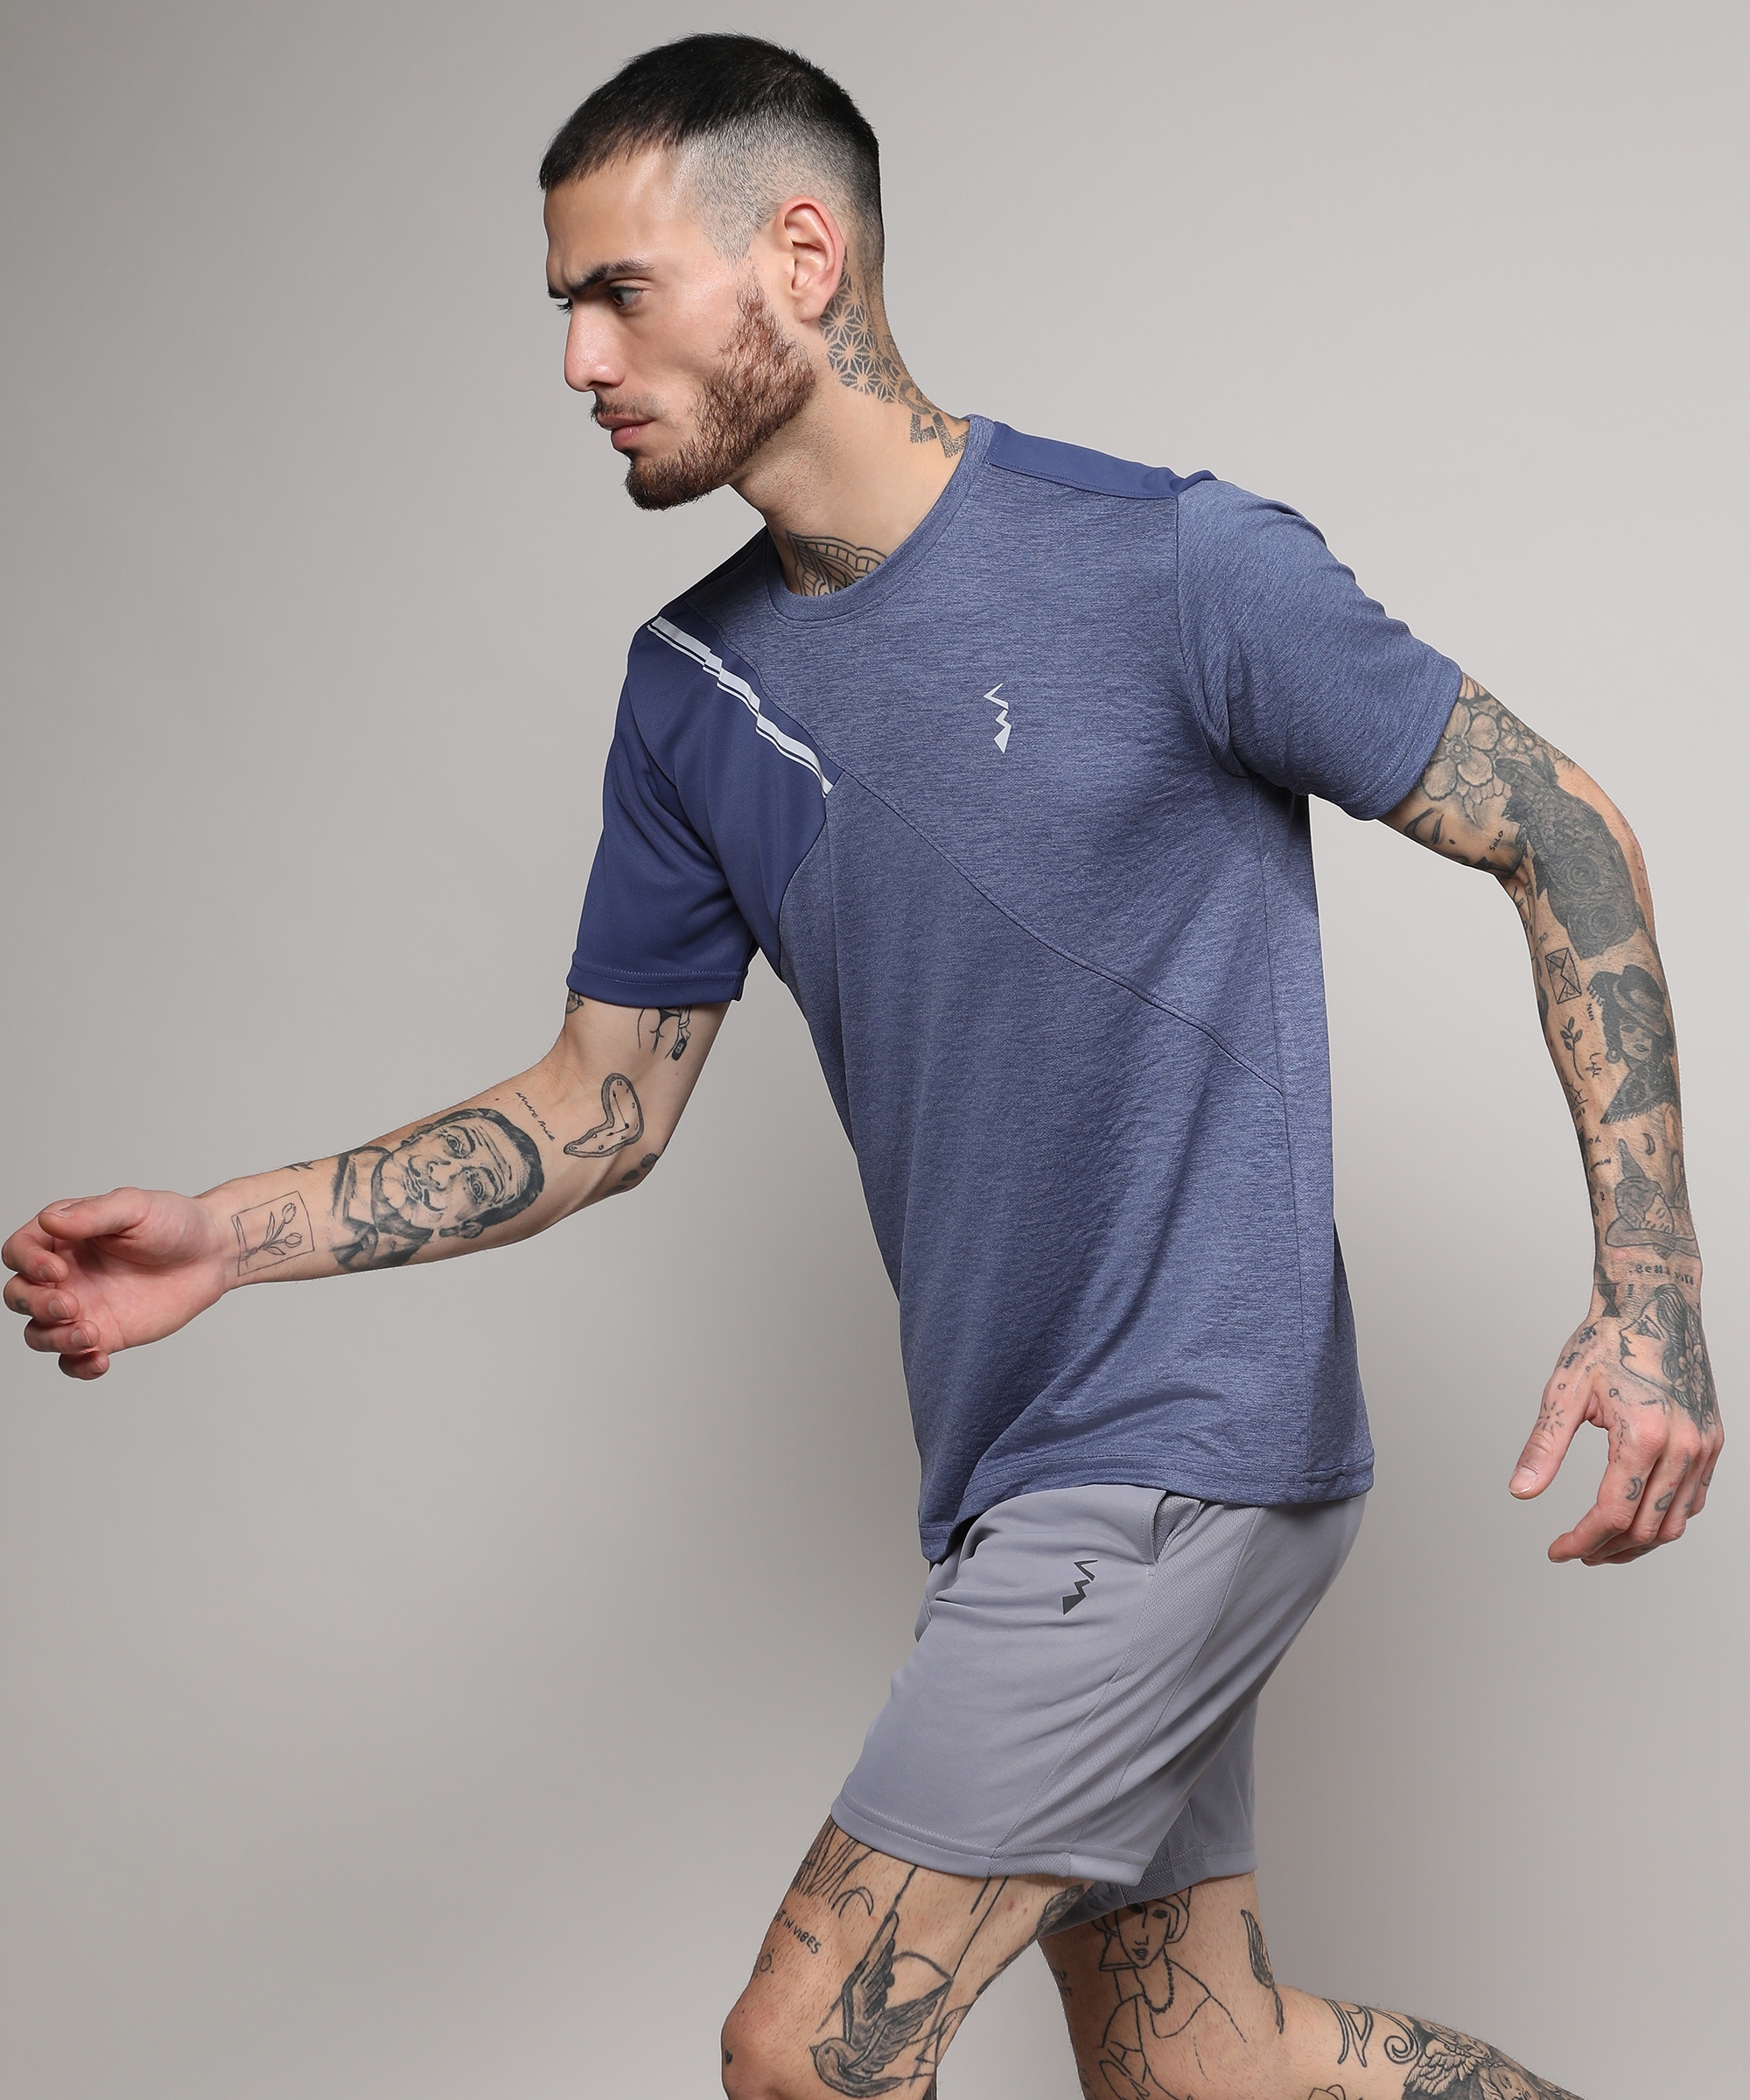 CAMPUS SUTRA | Men's Prussian Blue Solid Activewear T-Shirt